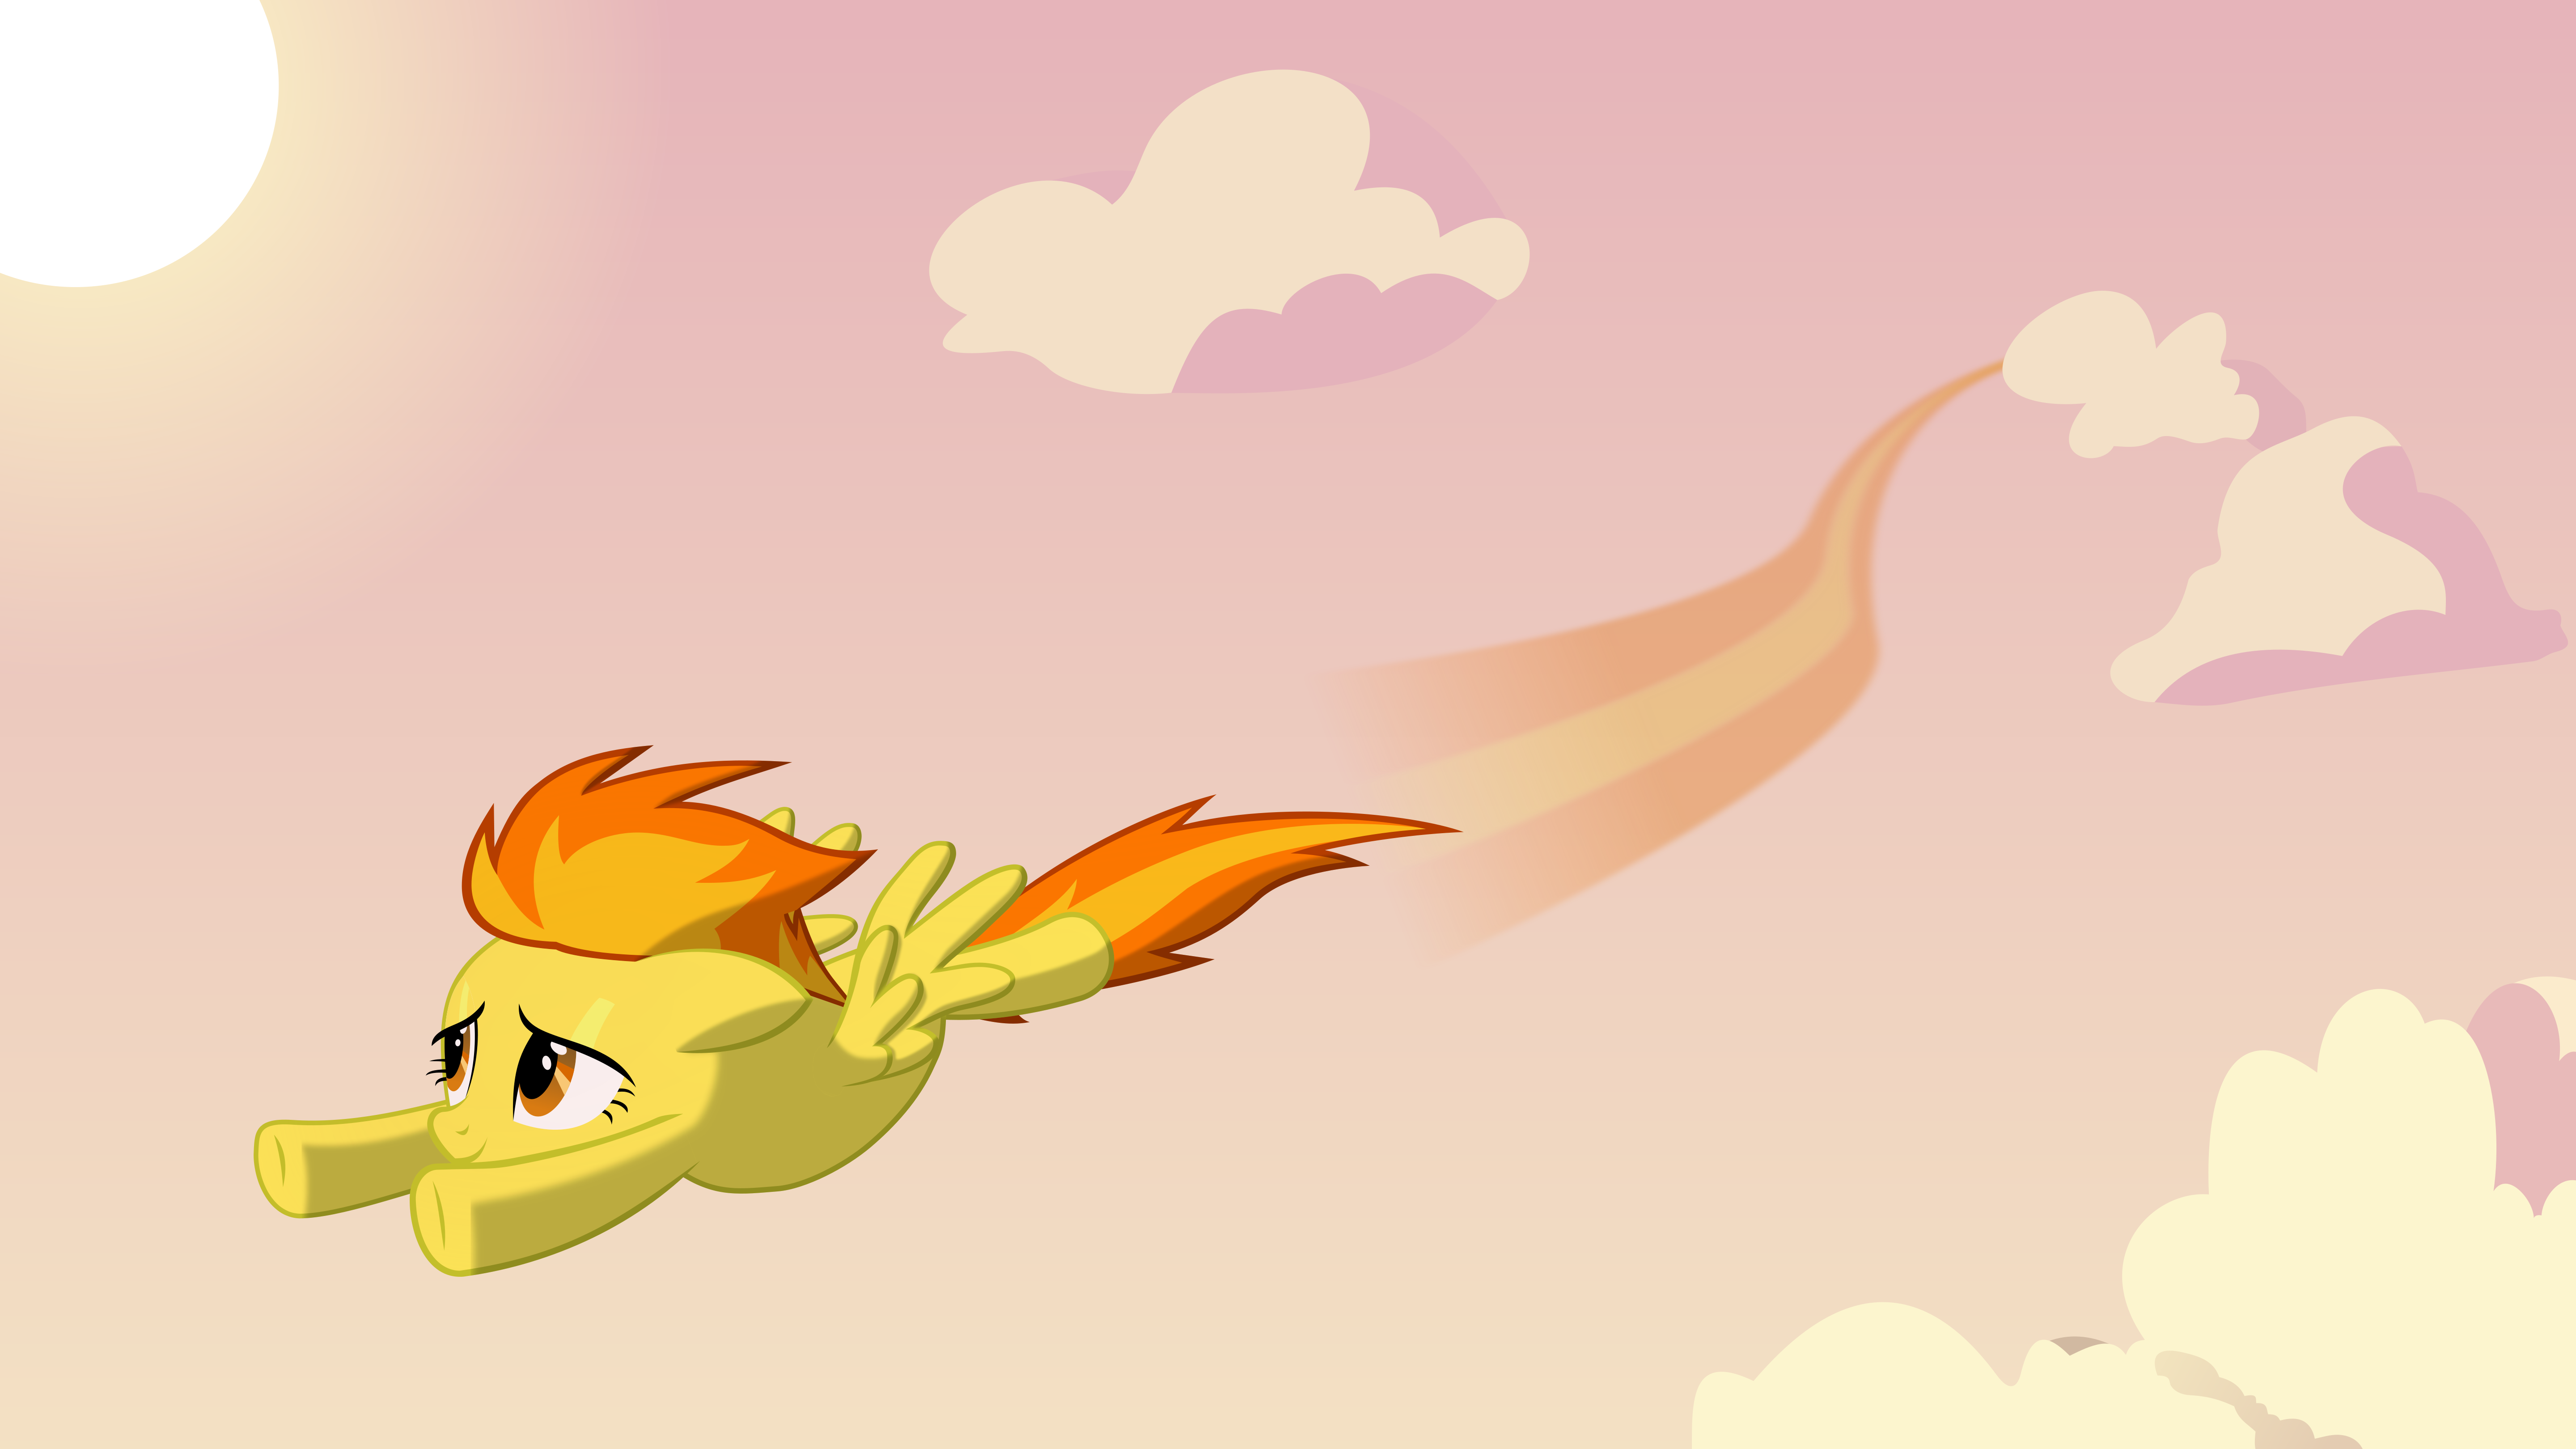 Spitfire flying through a cloudy sky by BaumkuchenPony